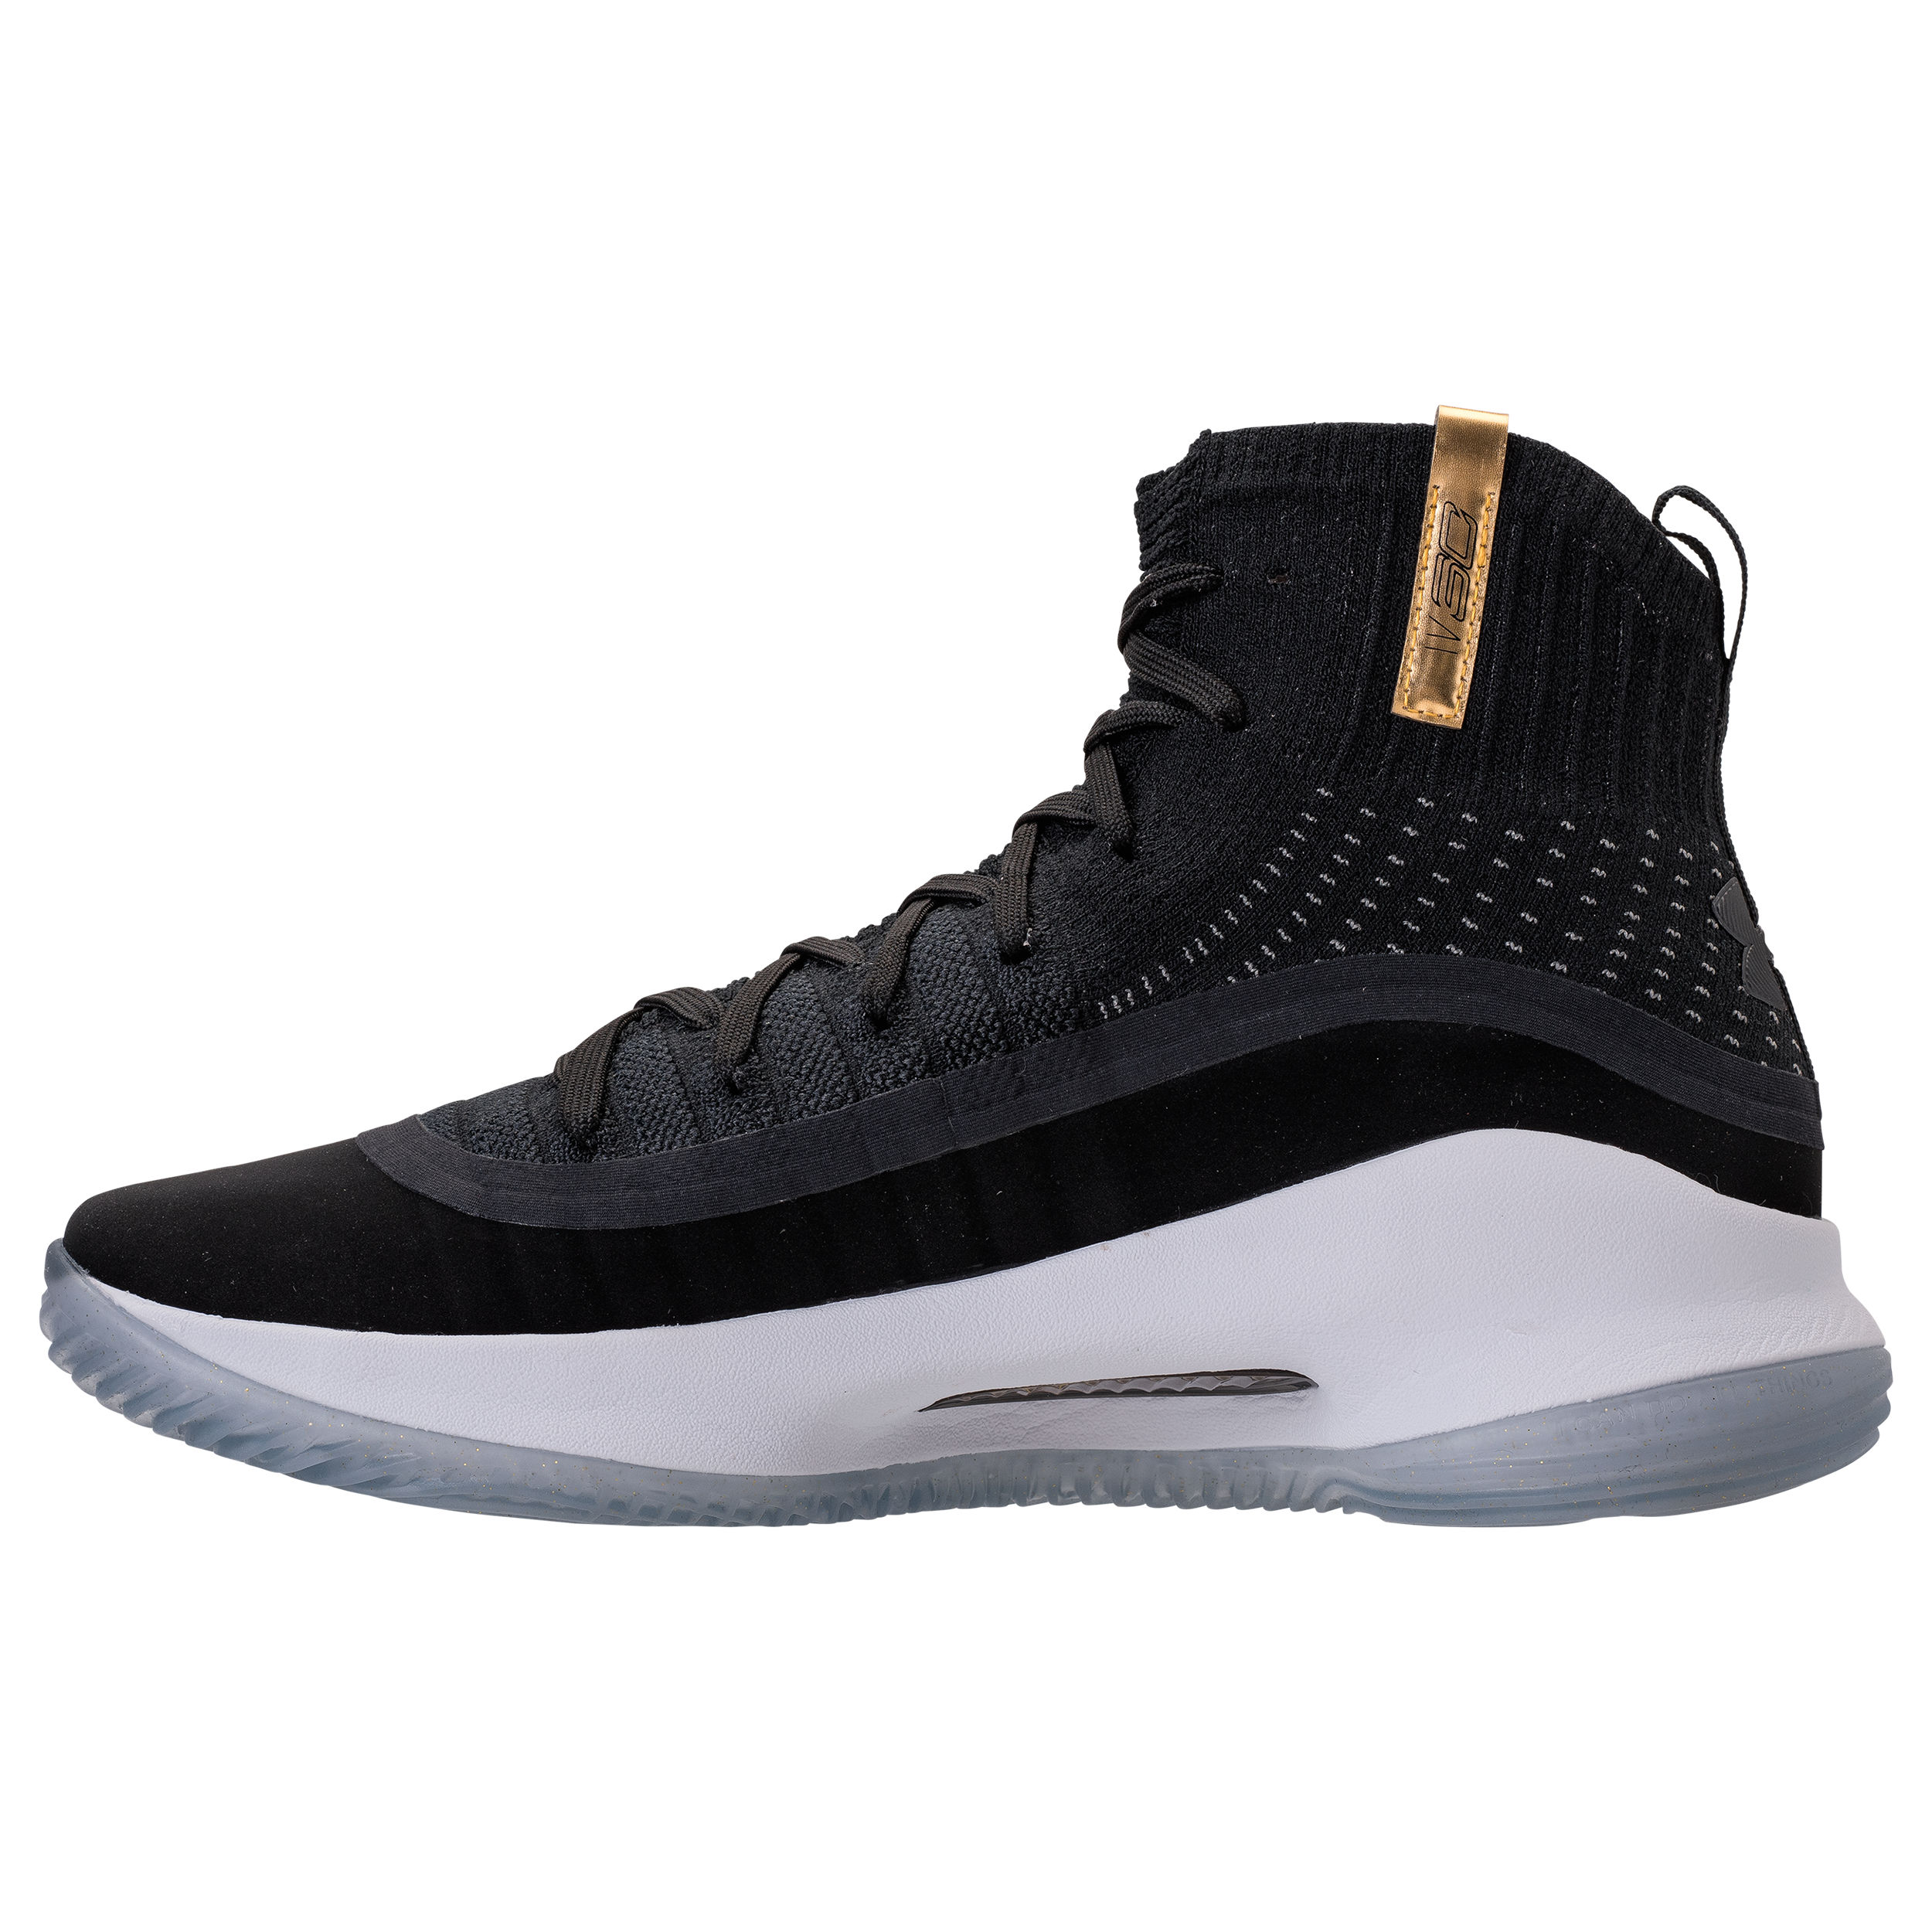 Under armour curry 4 black gold 3